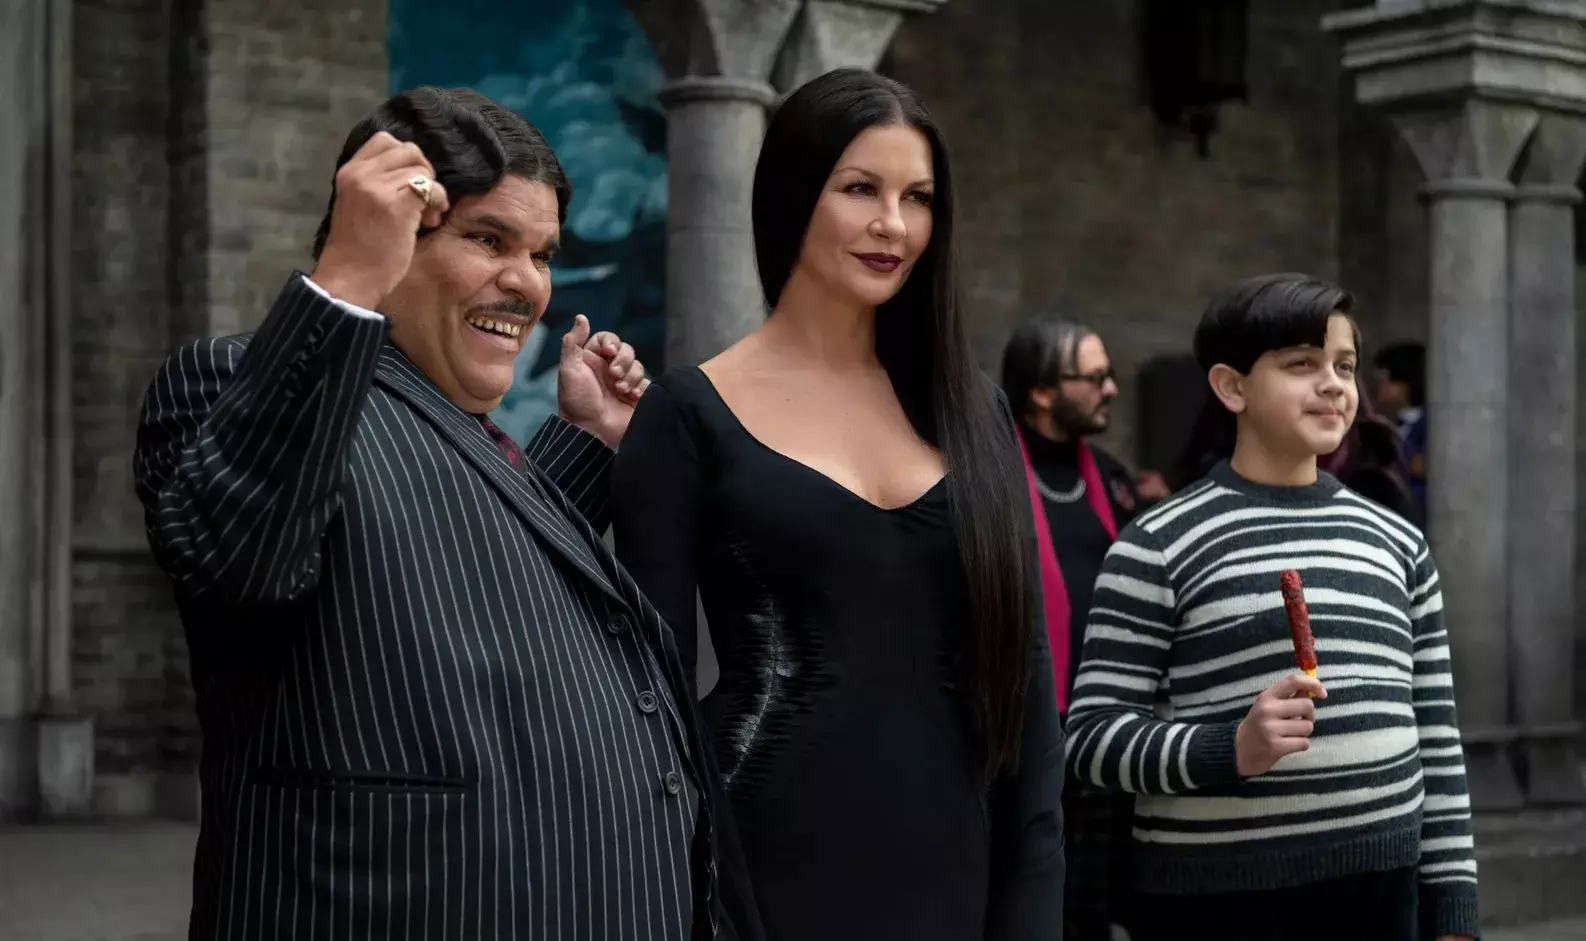 Wednesday showrunners tease more Addams Family in potential second season